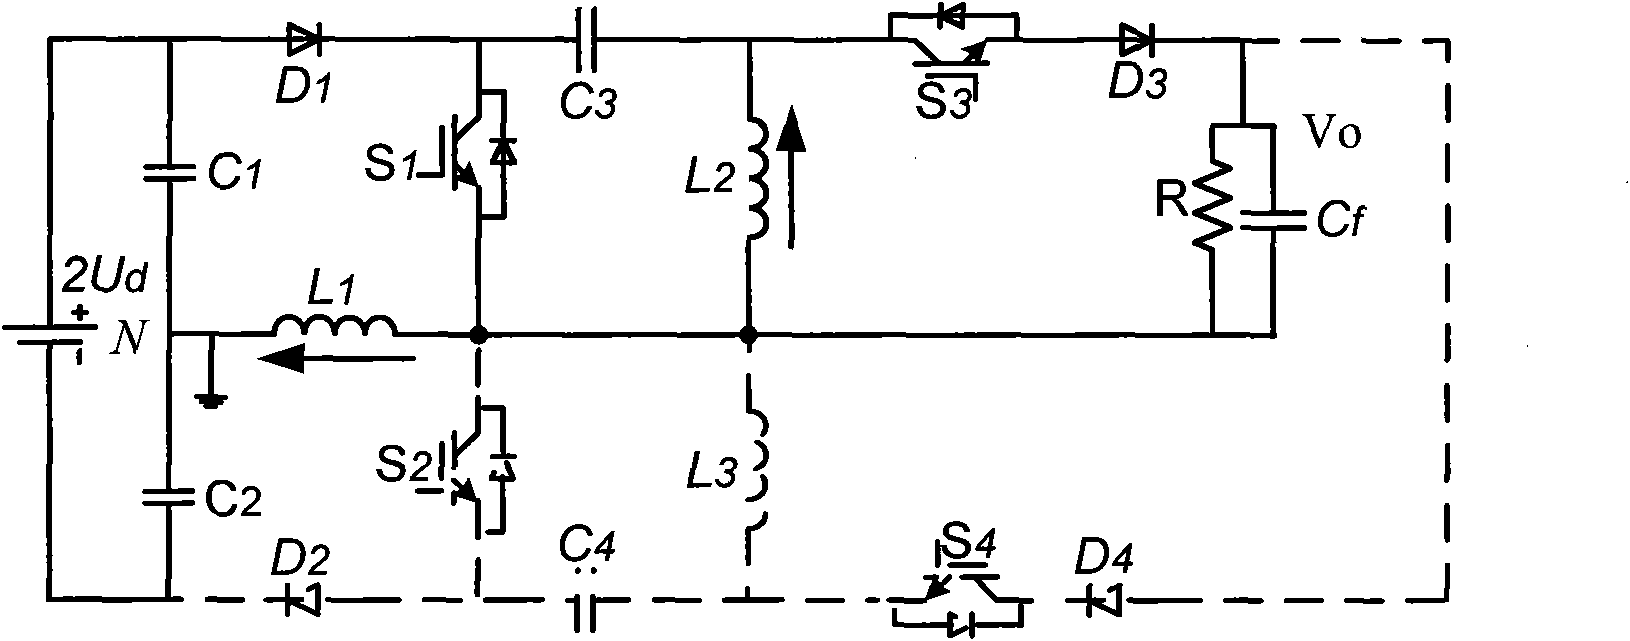 Dual-Sepic buck-boost output parallel combined inverter